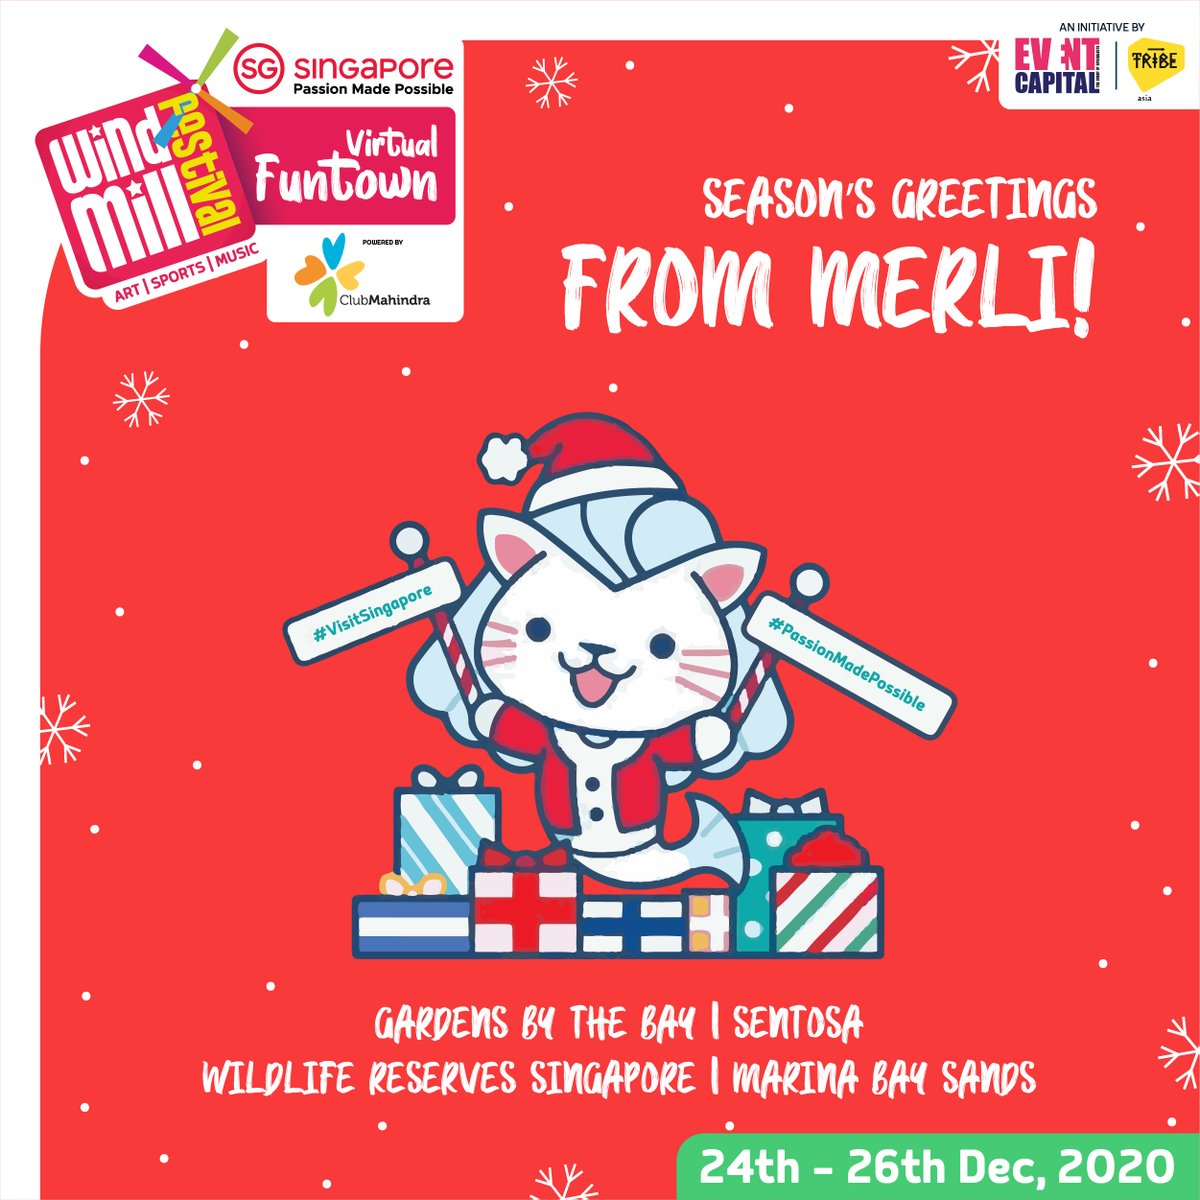 It's Day 2!!! We are Live. Merli wishes everyone Merry Christmas. Let the Fun Begin!! @Event_Capital #windmillfest #letswindmill #windmillchristmas #windmill2020 #kidsfestival #christmas #virtualchristmas #allaboutchristmas #christmasfestival #virtualevent